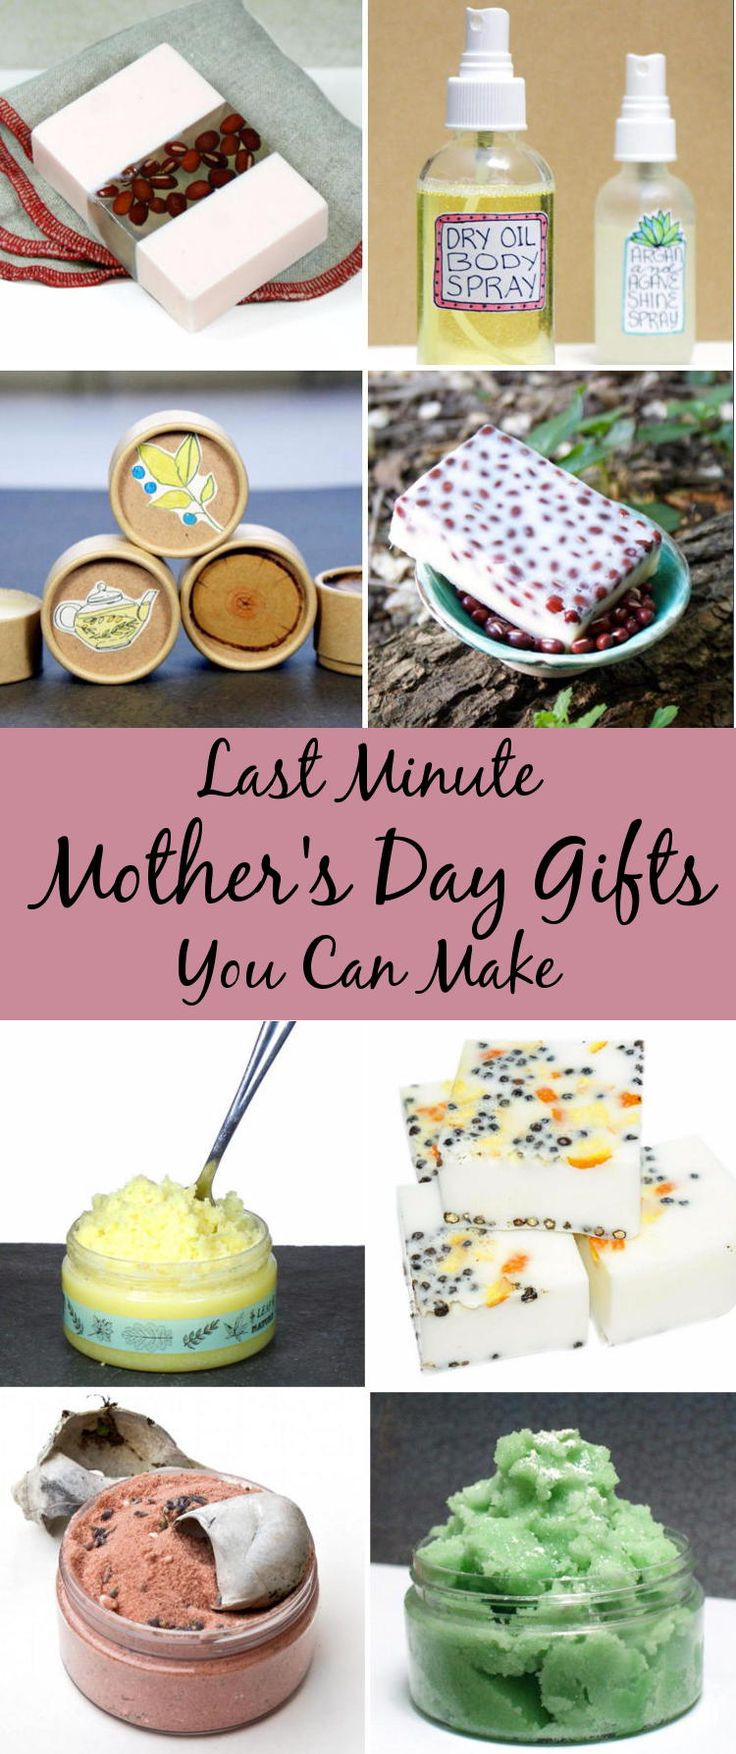 Homemade Mother'S Day Gift Ideas
 Best 25 Mothers day ideas ideas on Pinterest